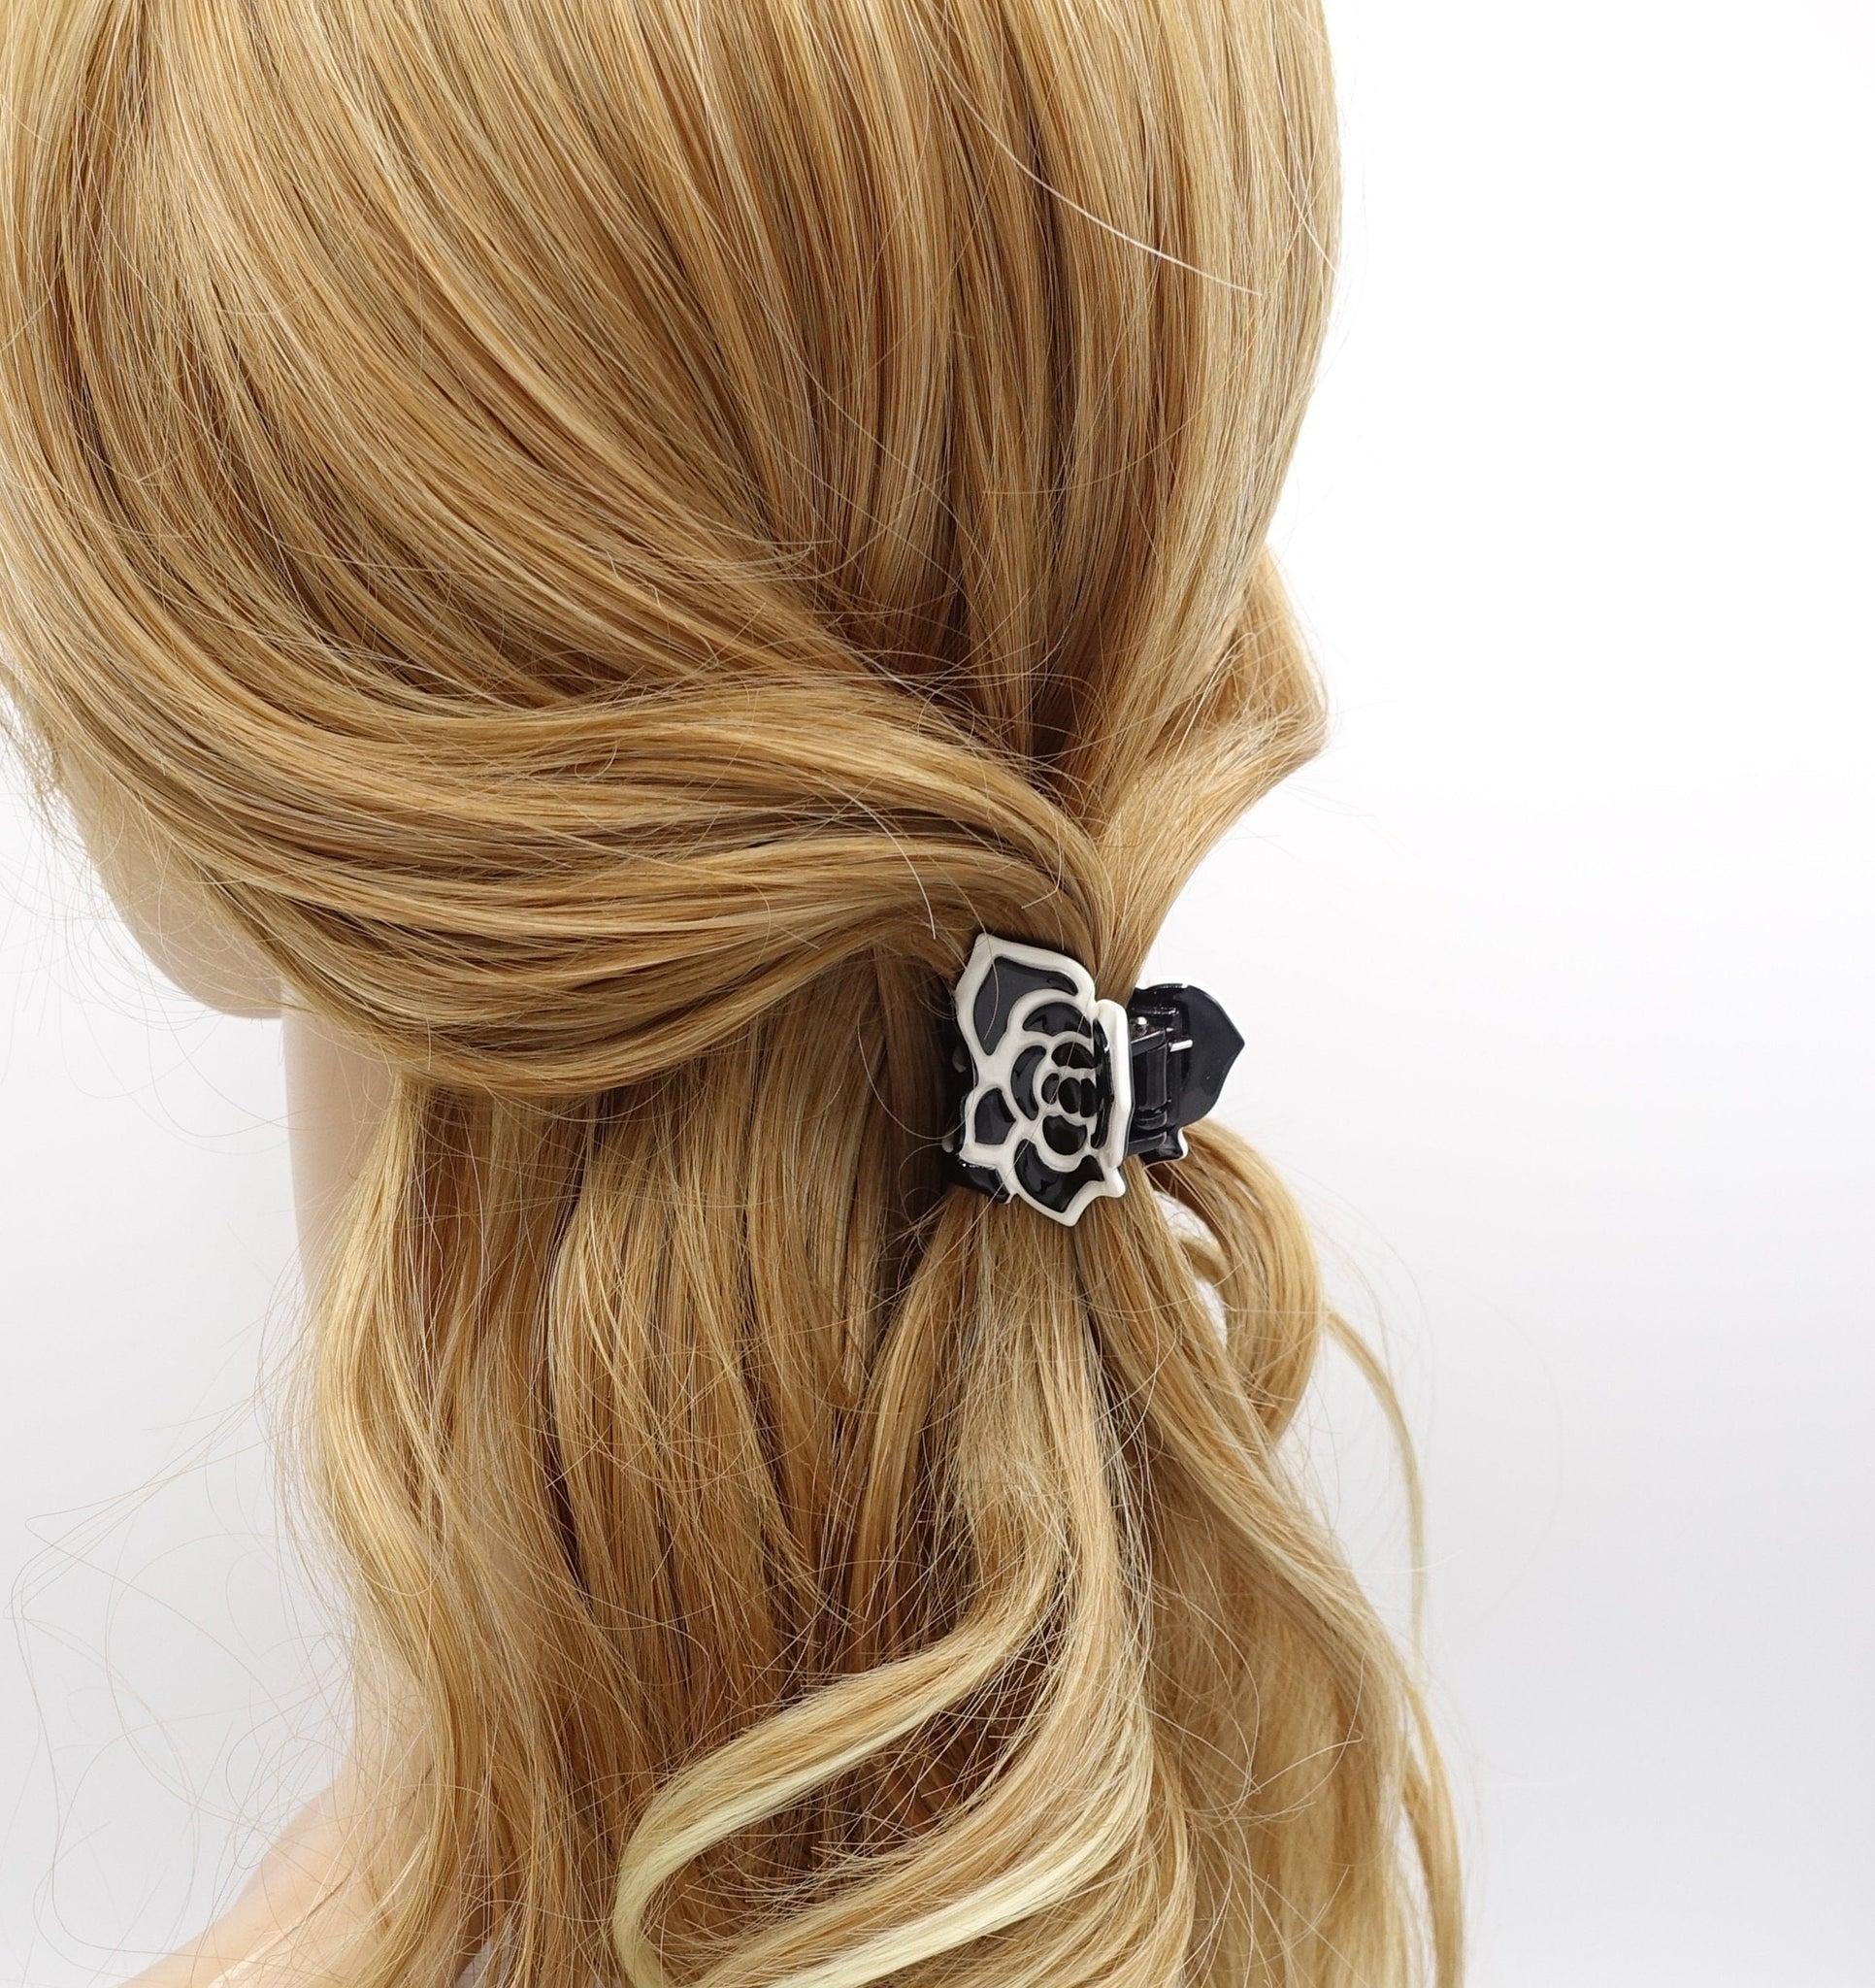 veryshine.com Hair Claw Small black cellulose flower hair claw, rose hair claw for women